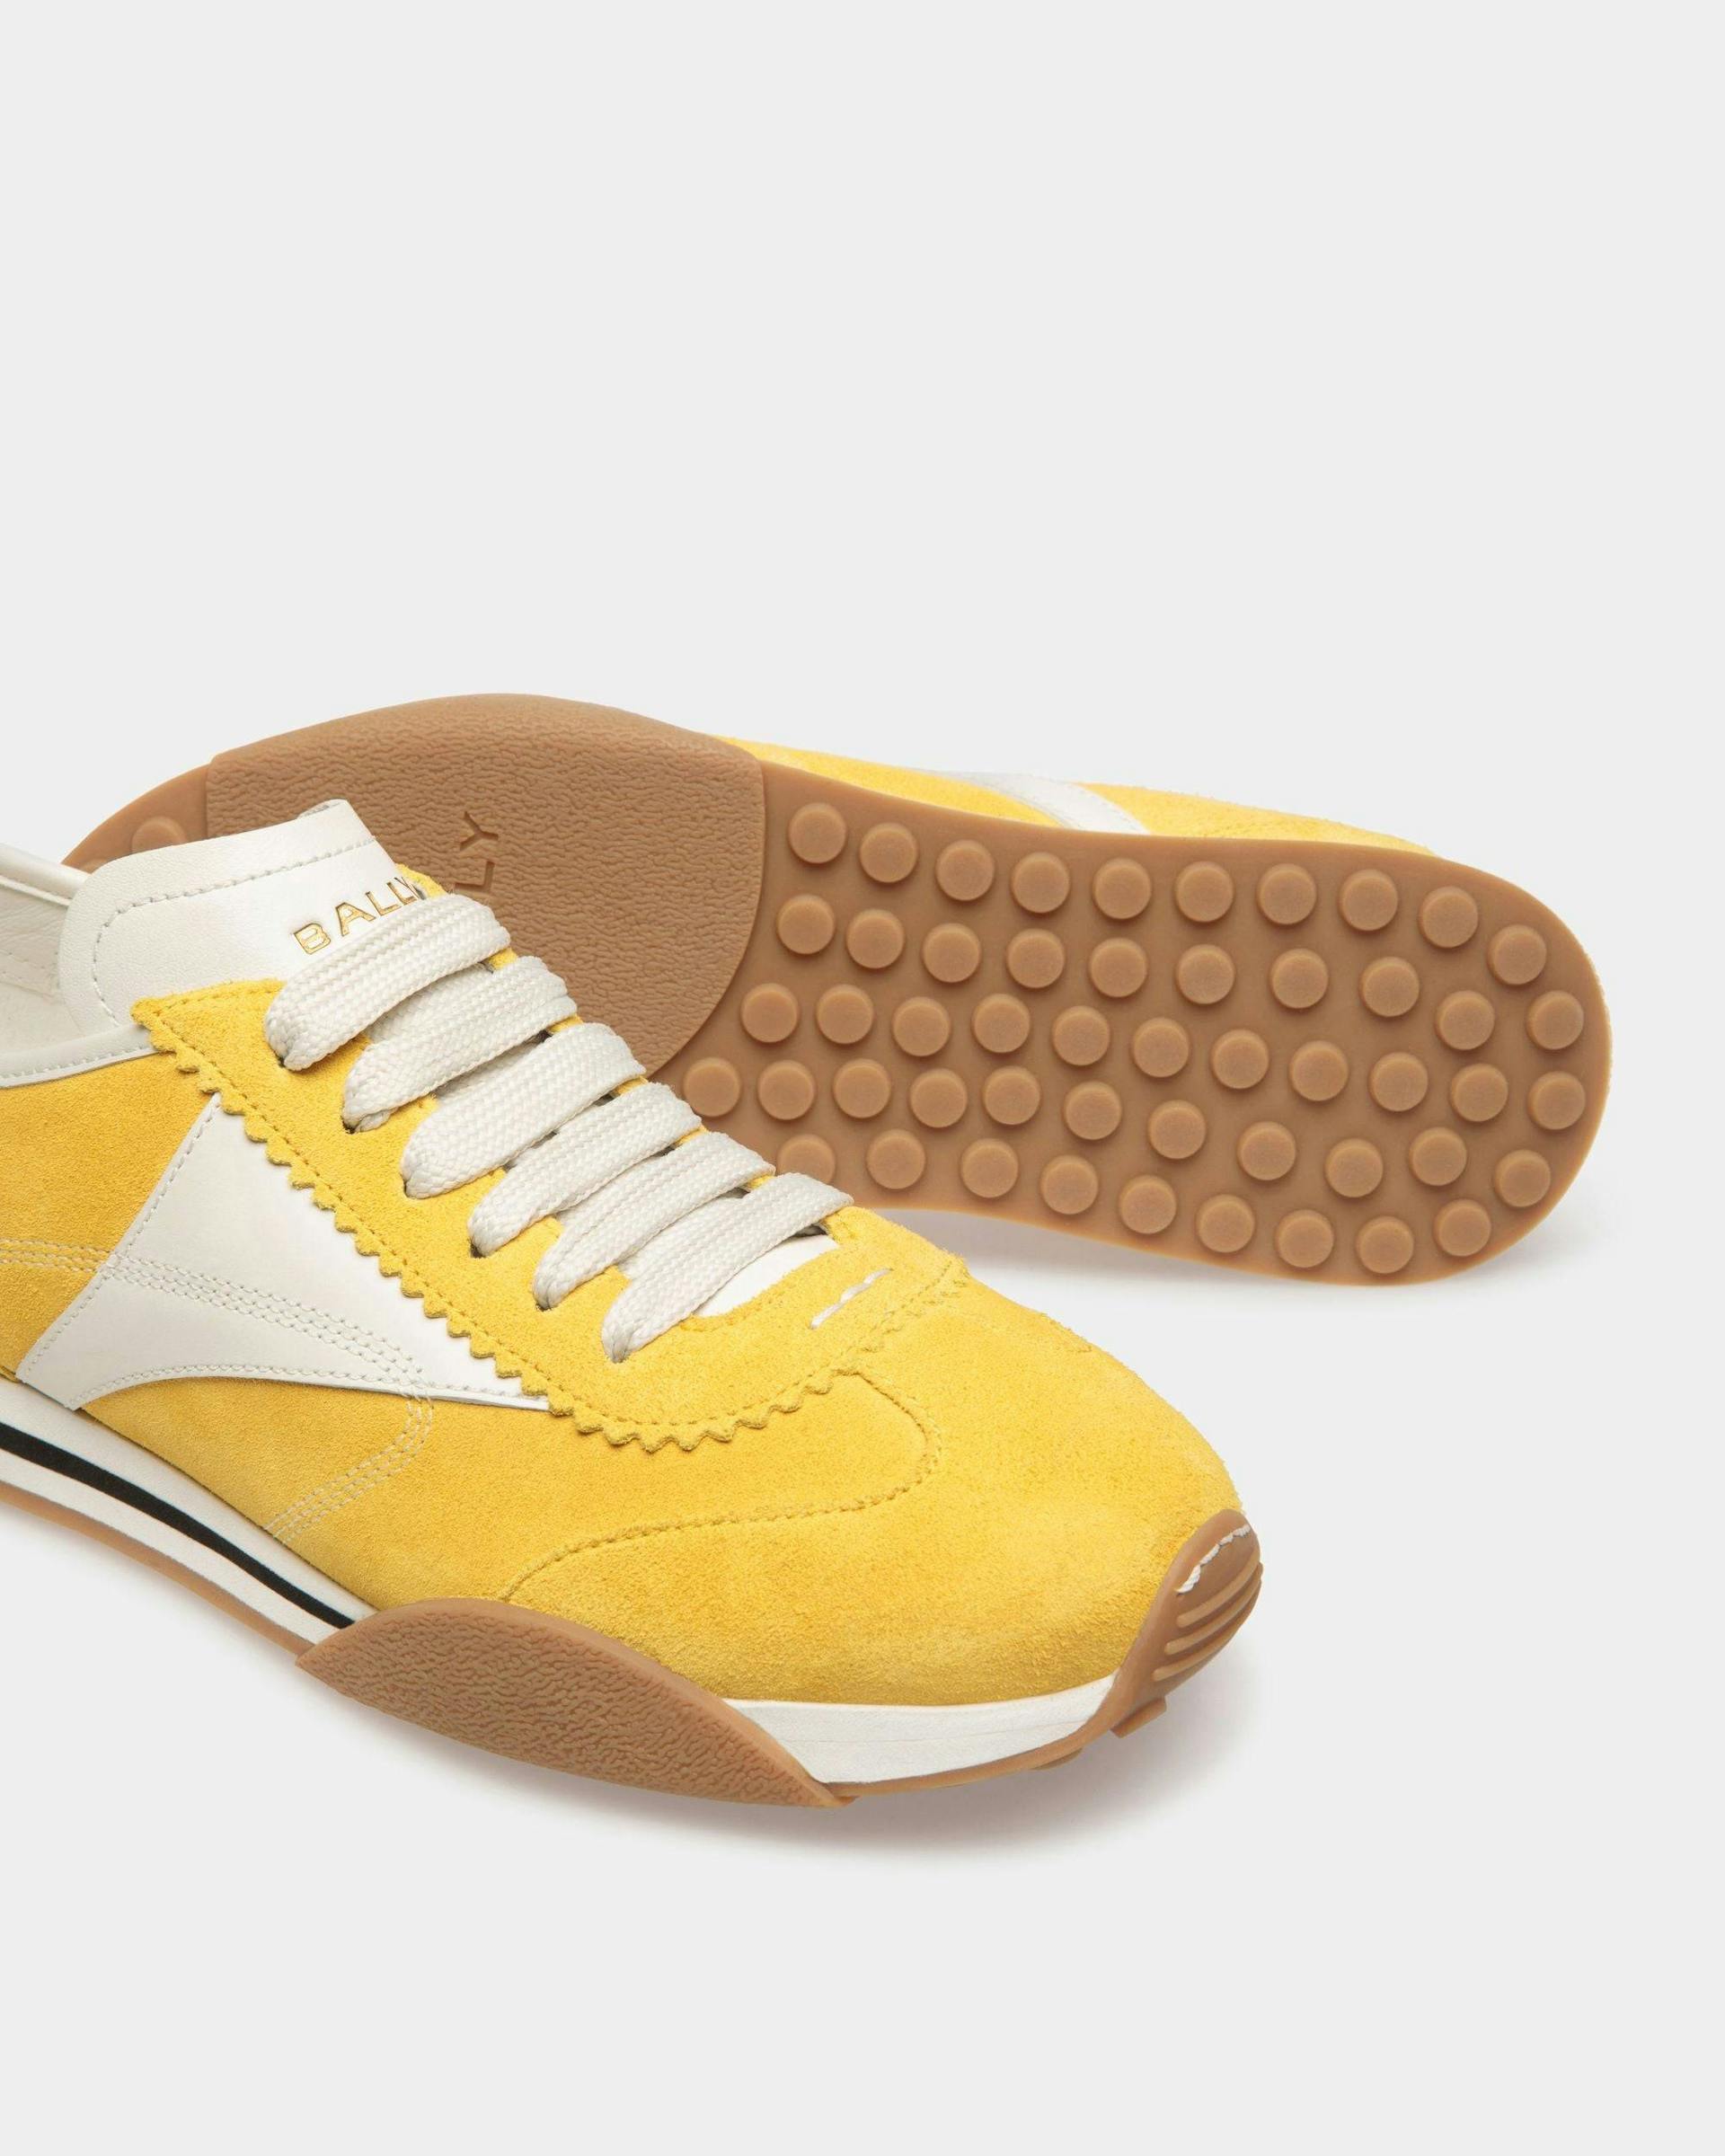 Sussex Sneakers In Yellow And White Leather - Women's - Bally - 05